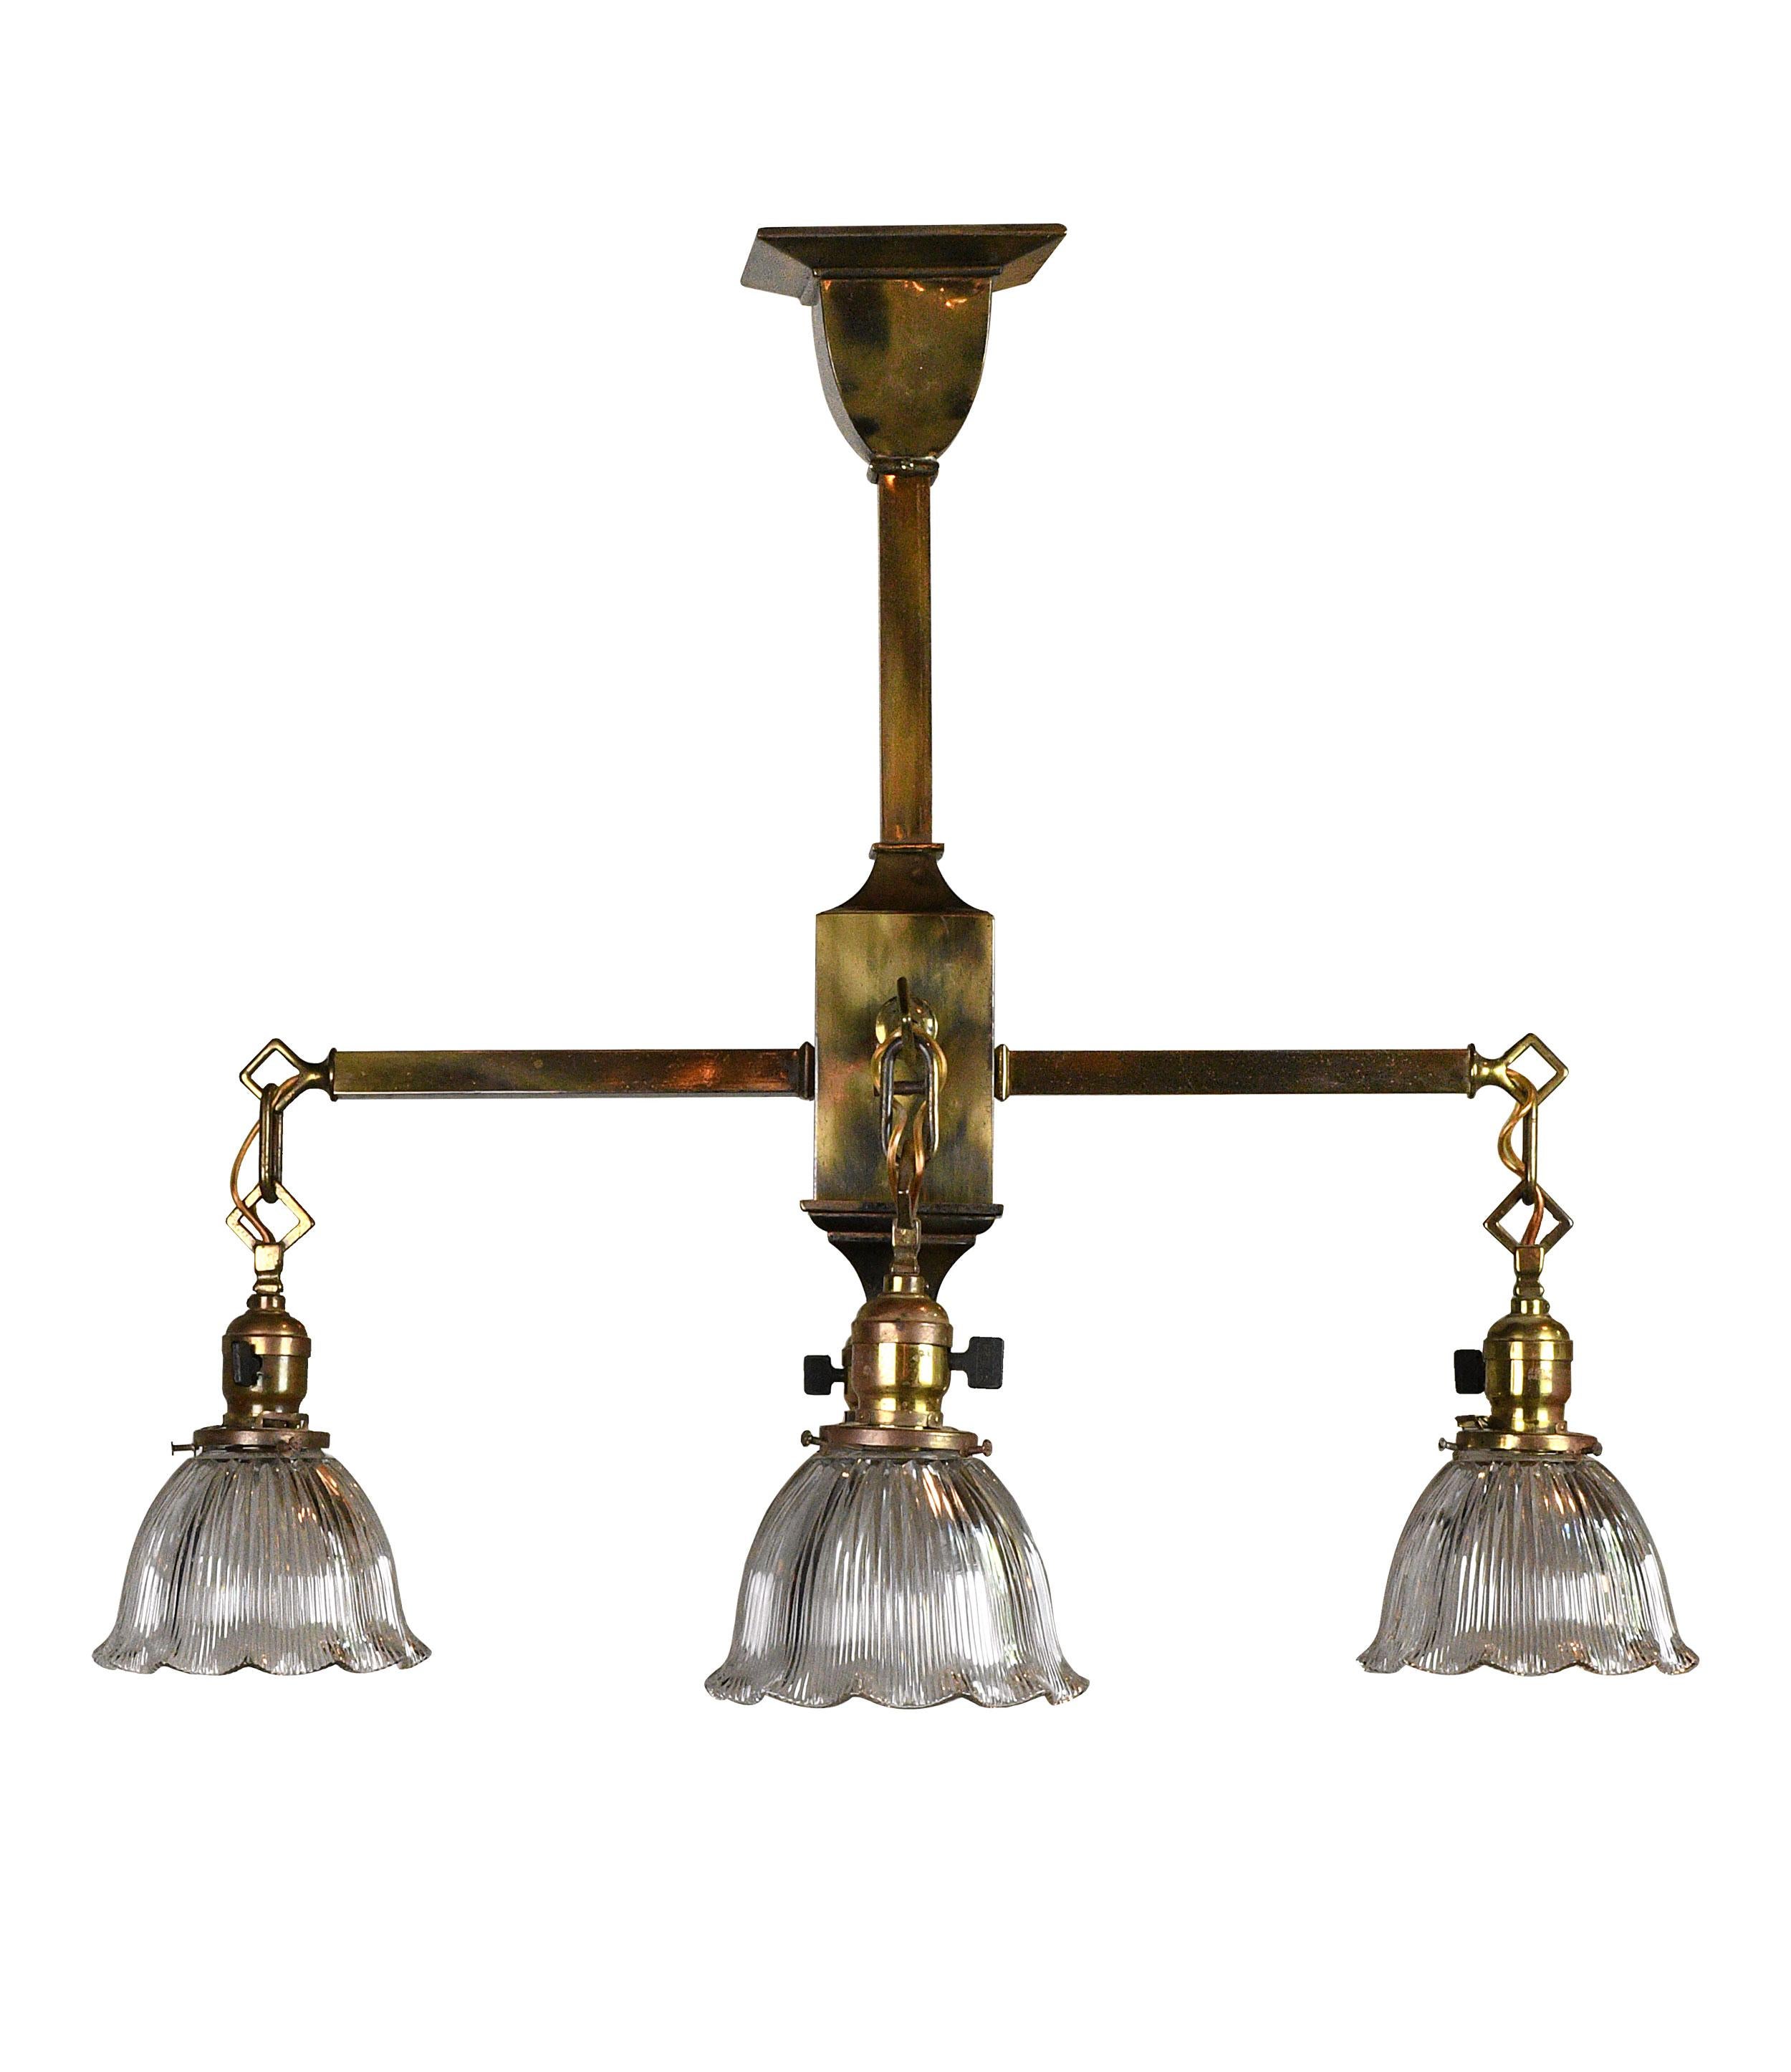 Four-arm brass mission chandelier with four skirted Holophane shades. The brass has a lovely mottled quality that is at once bright and moody, and the scalloped shades add a pleasant sense of movement to the otherwise straight edged fixture.